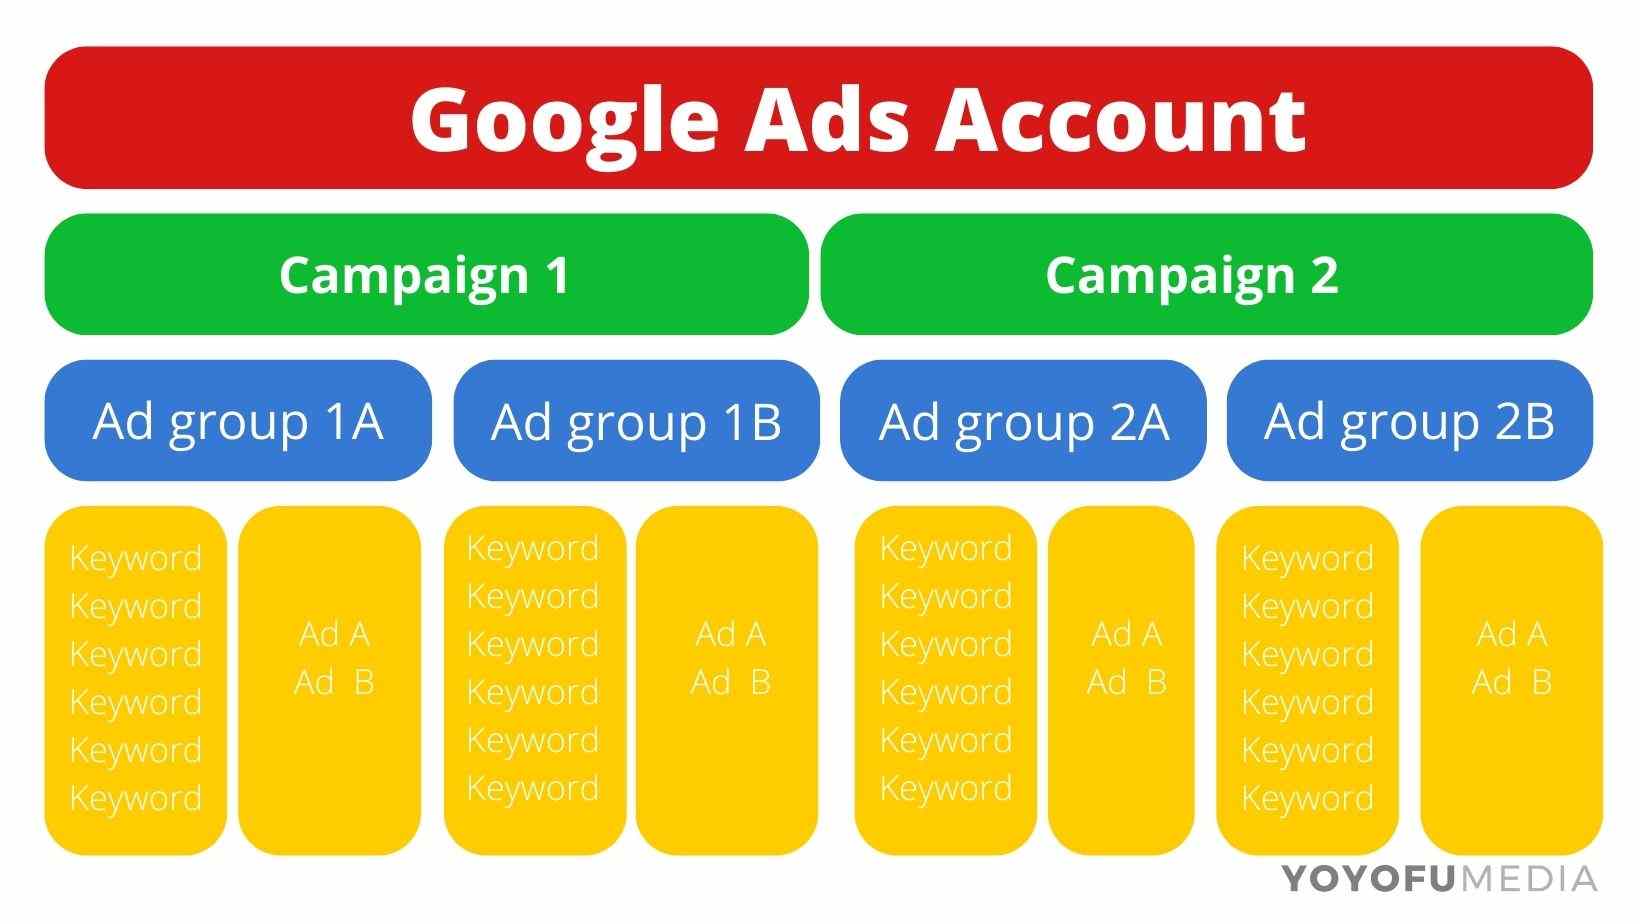 Google Ads structure